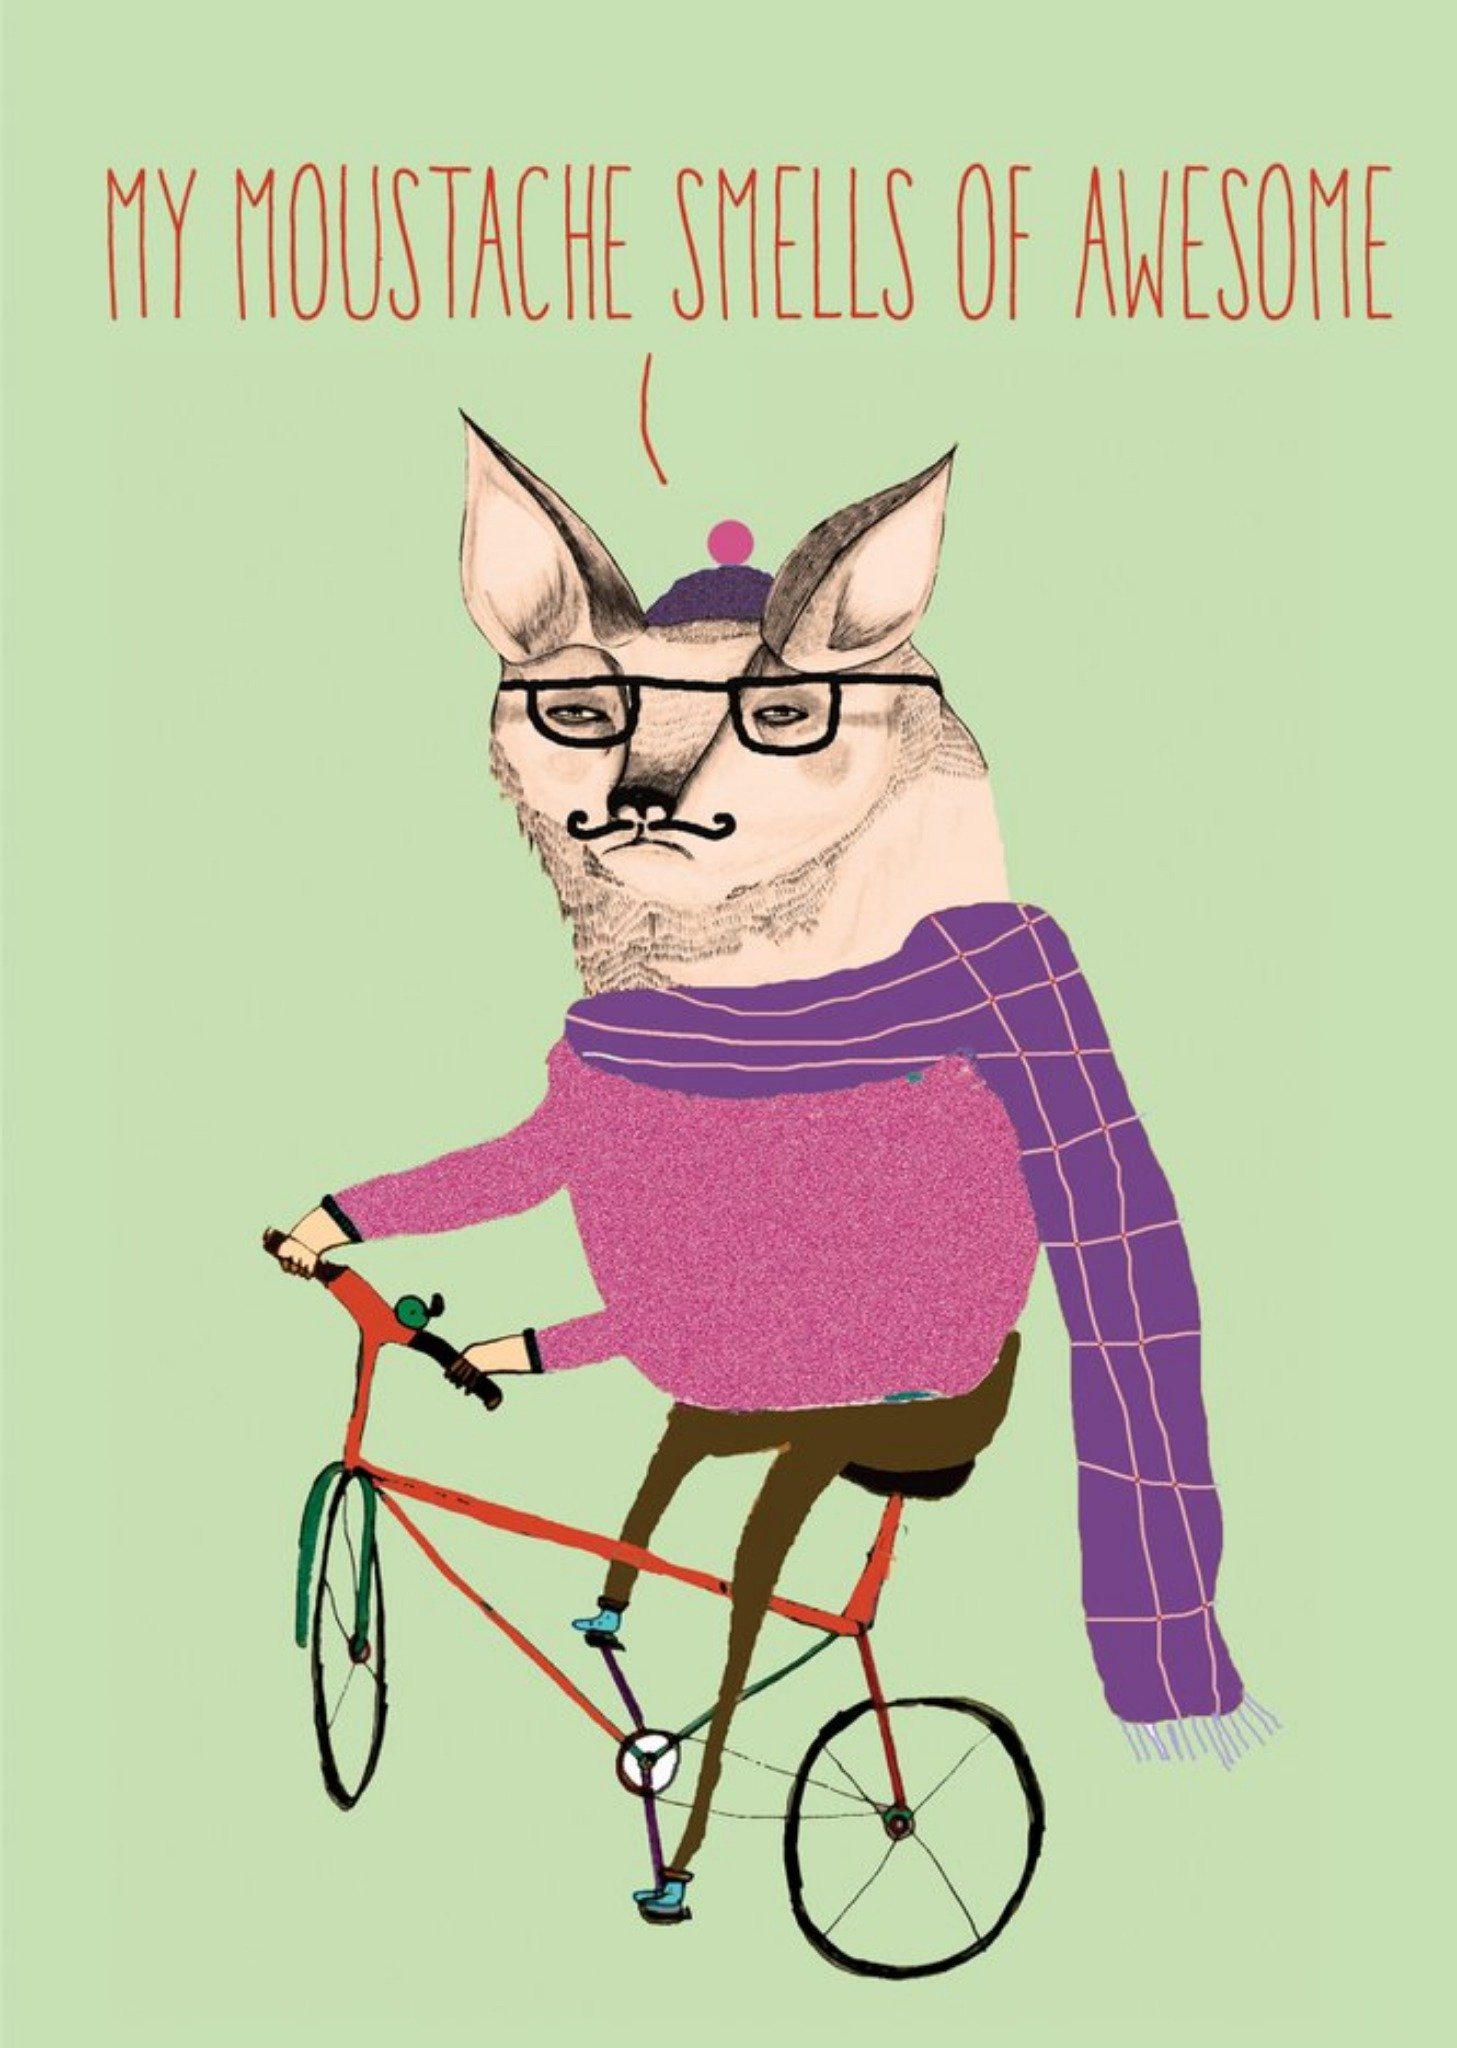 Brainbox Candy Funny Fox Riding Bike Moustache Smells Of Awesome Card Ecard